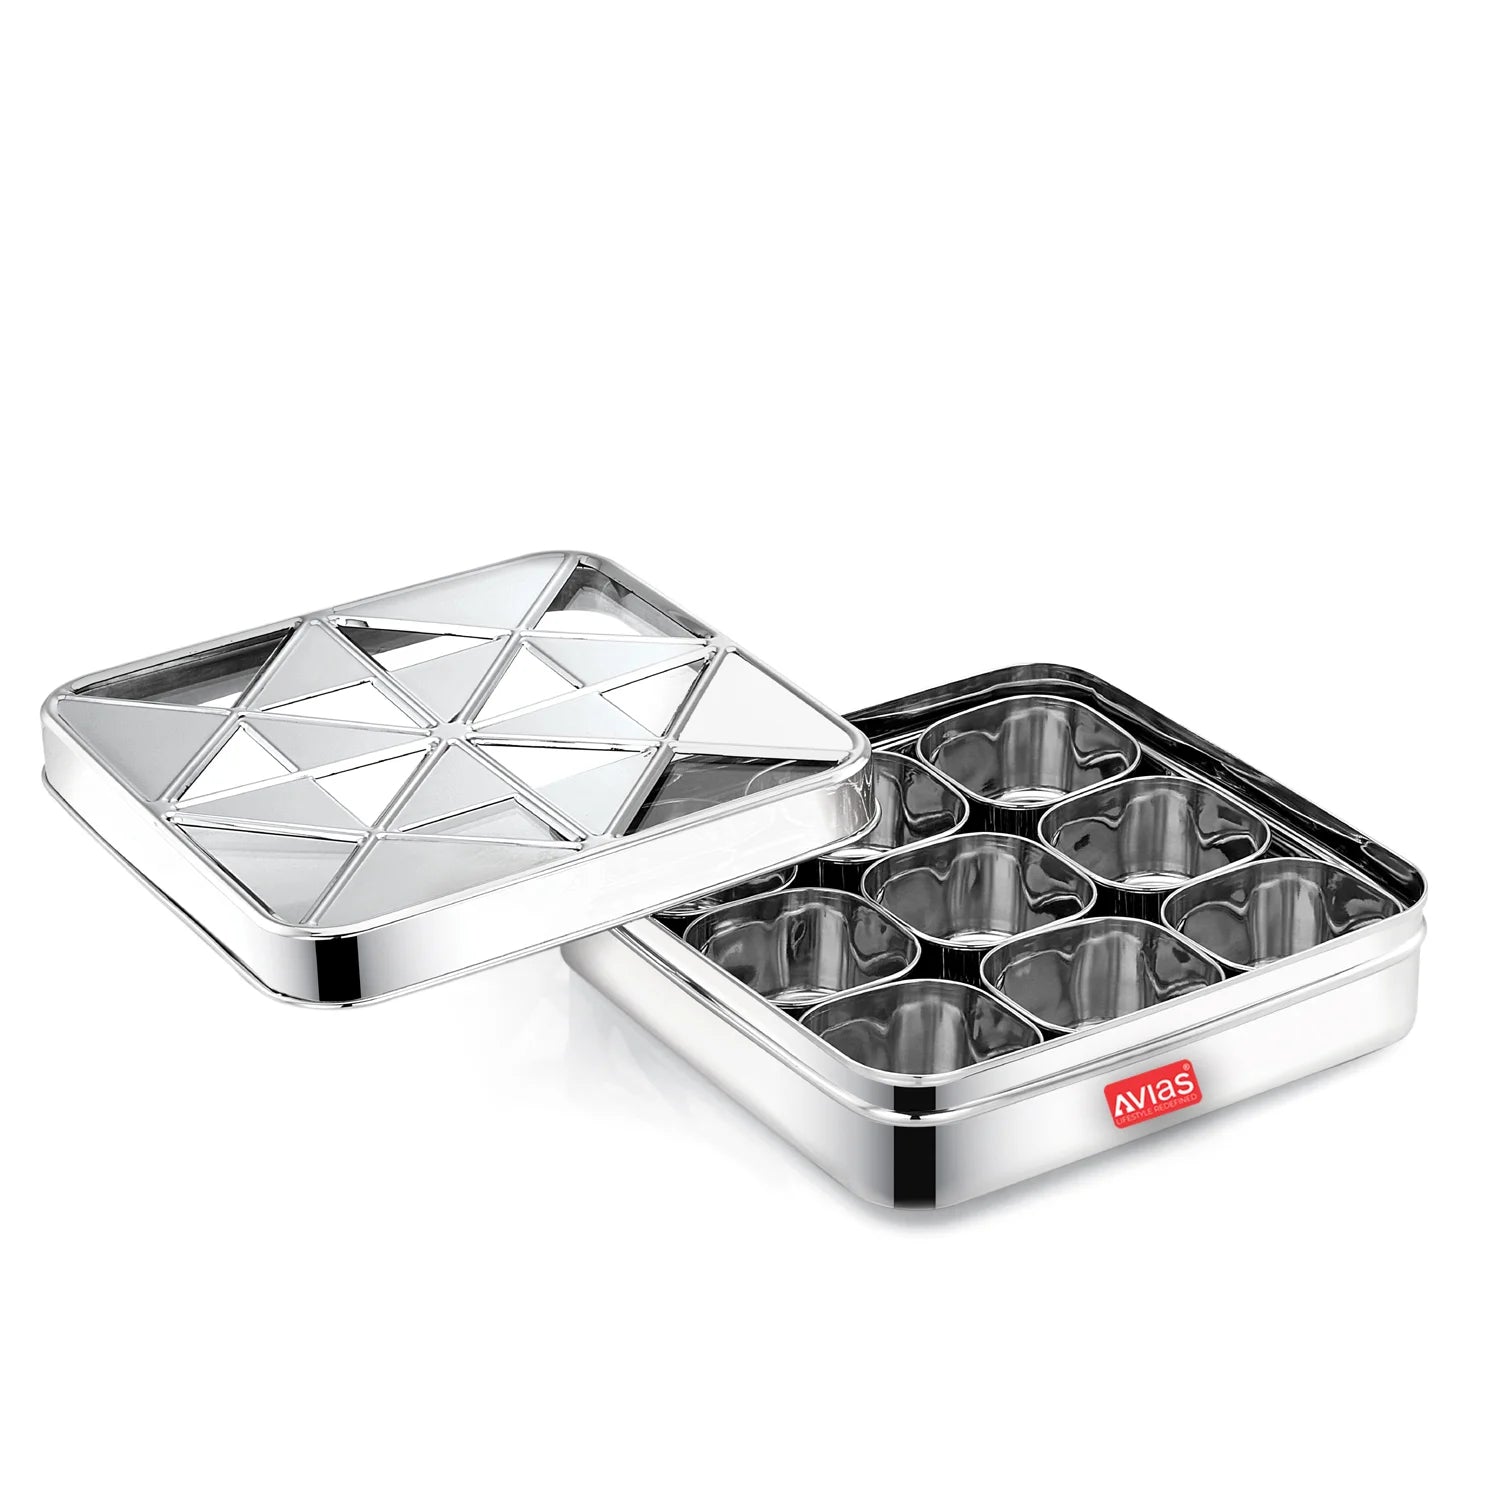 AVIAS Trios 9 square dryfruit cum spice box |Premium quality stainless steel |see-through lid with unbreakable acrylic sheet